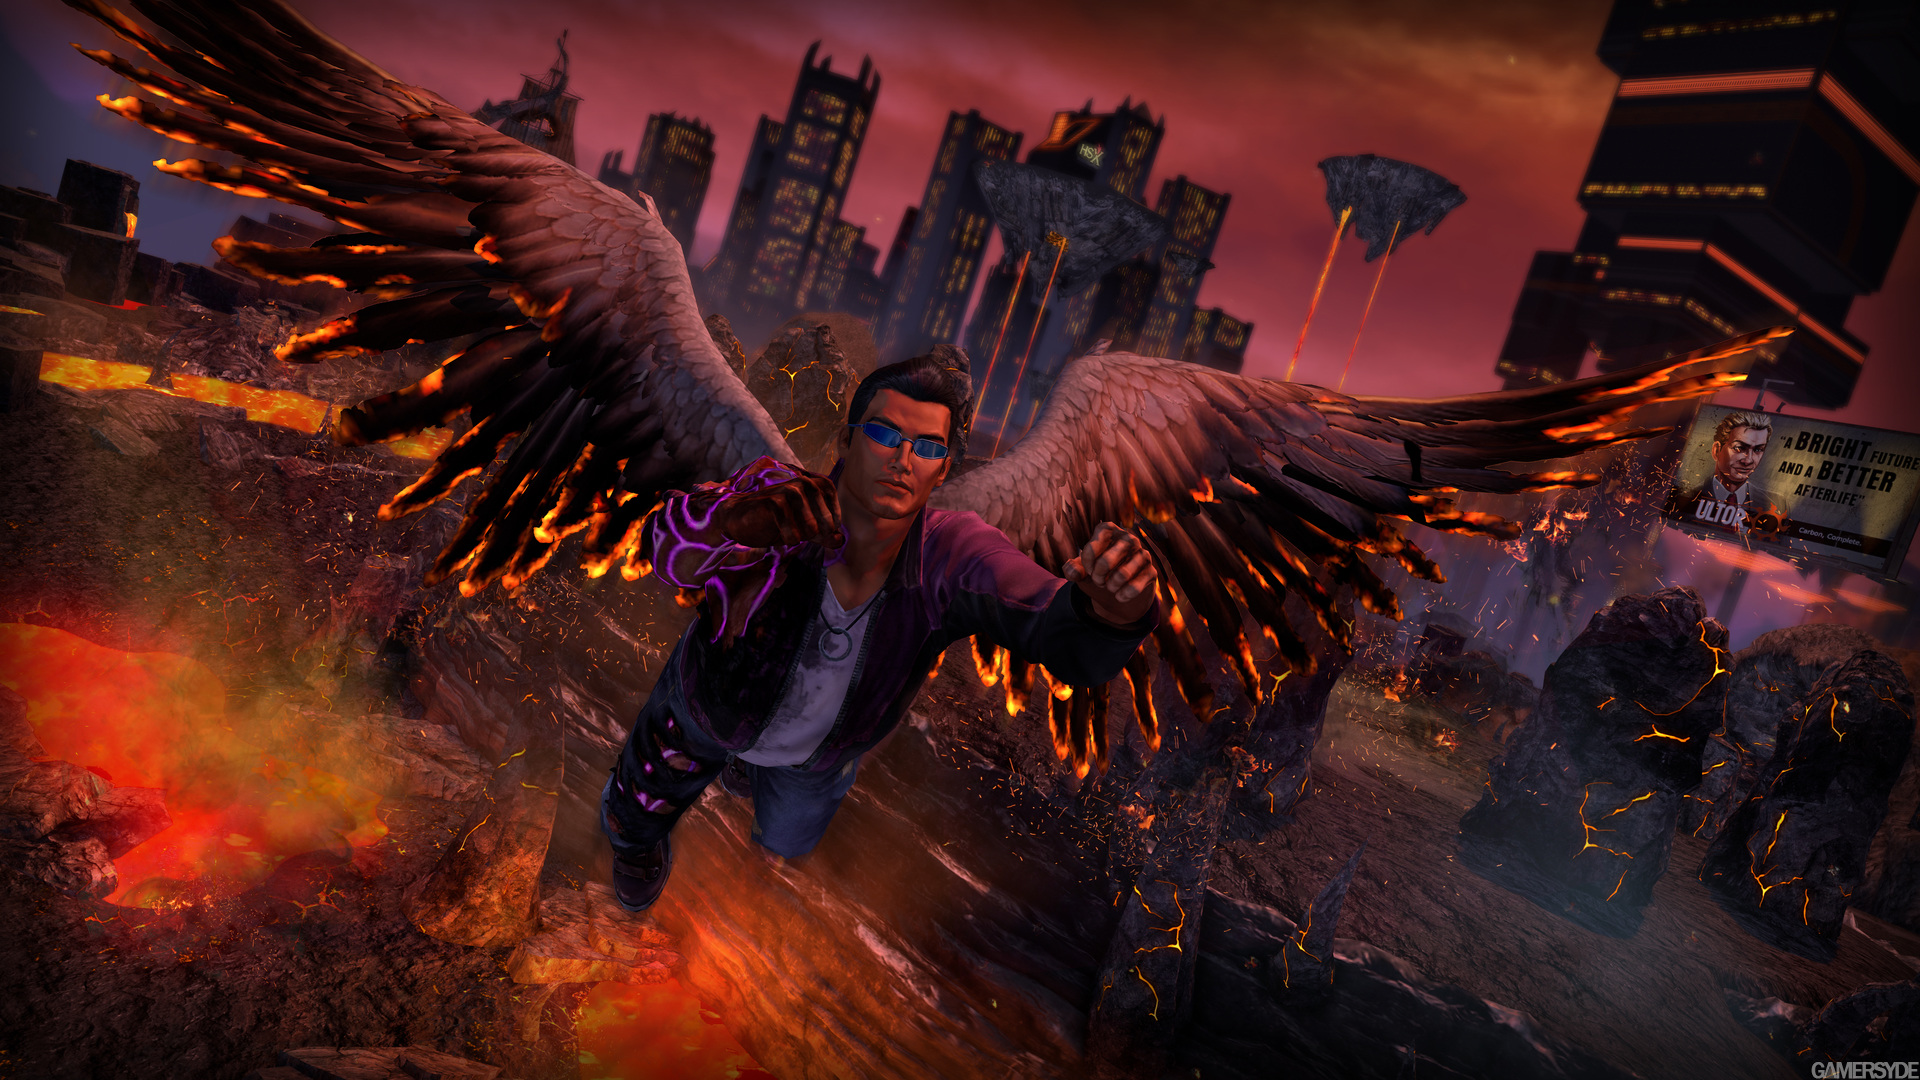 image_saints_row_gat_out_of_hell-26149-3079_0001.jpg